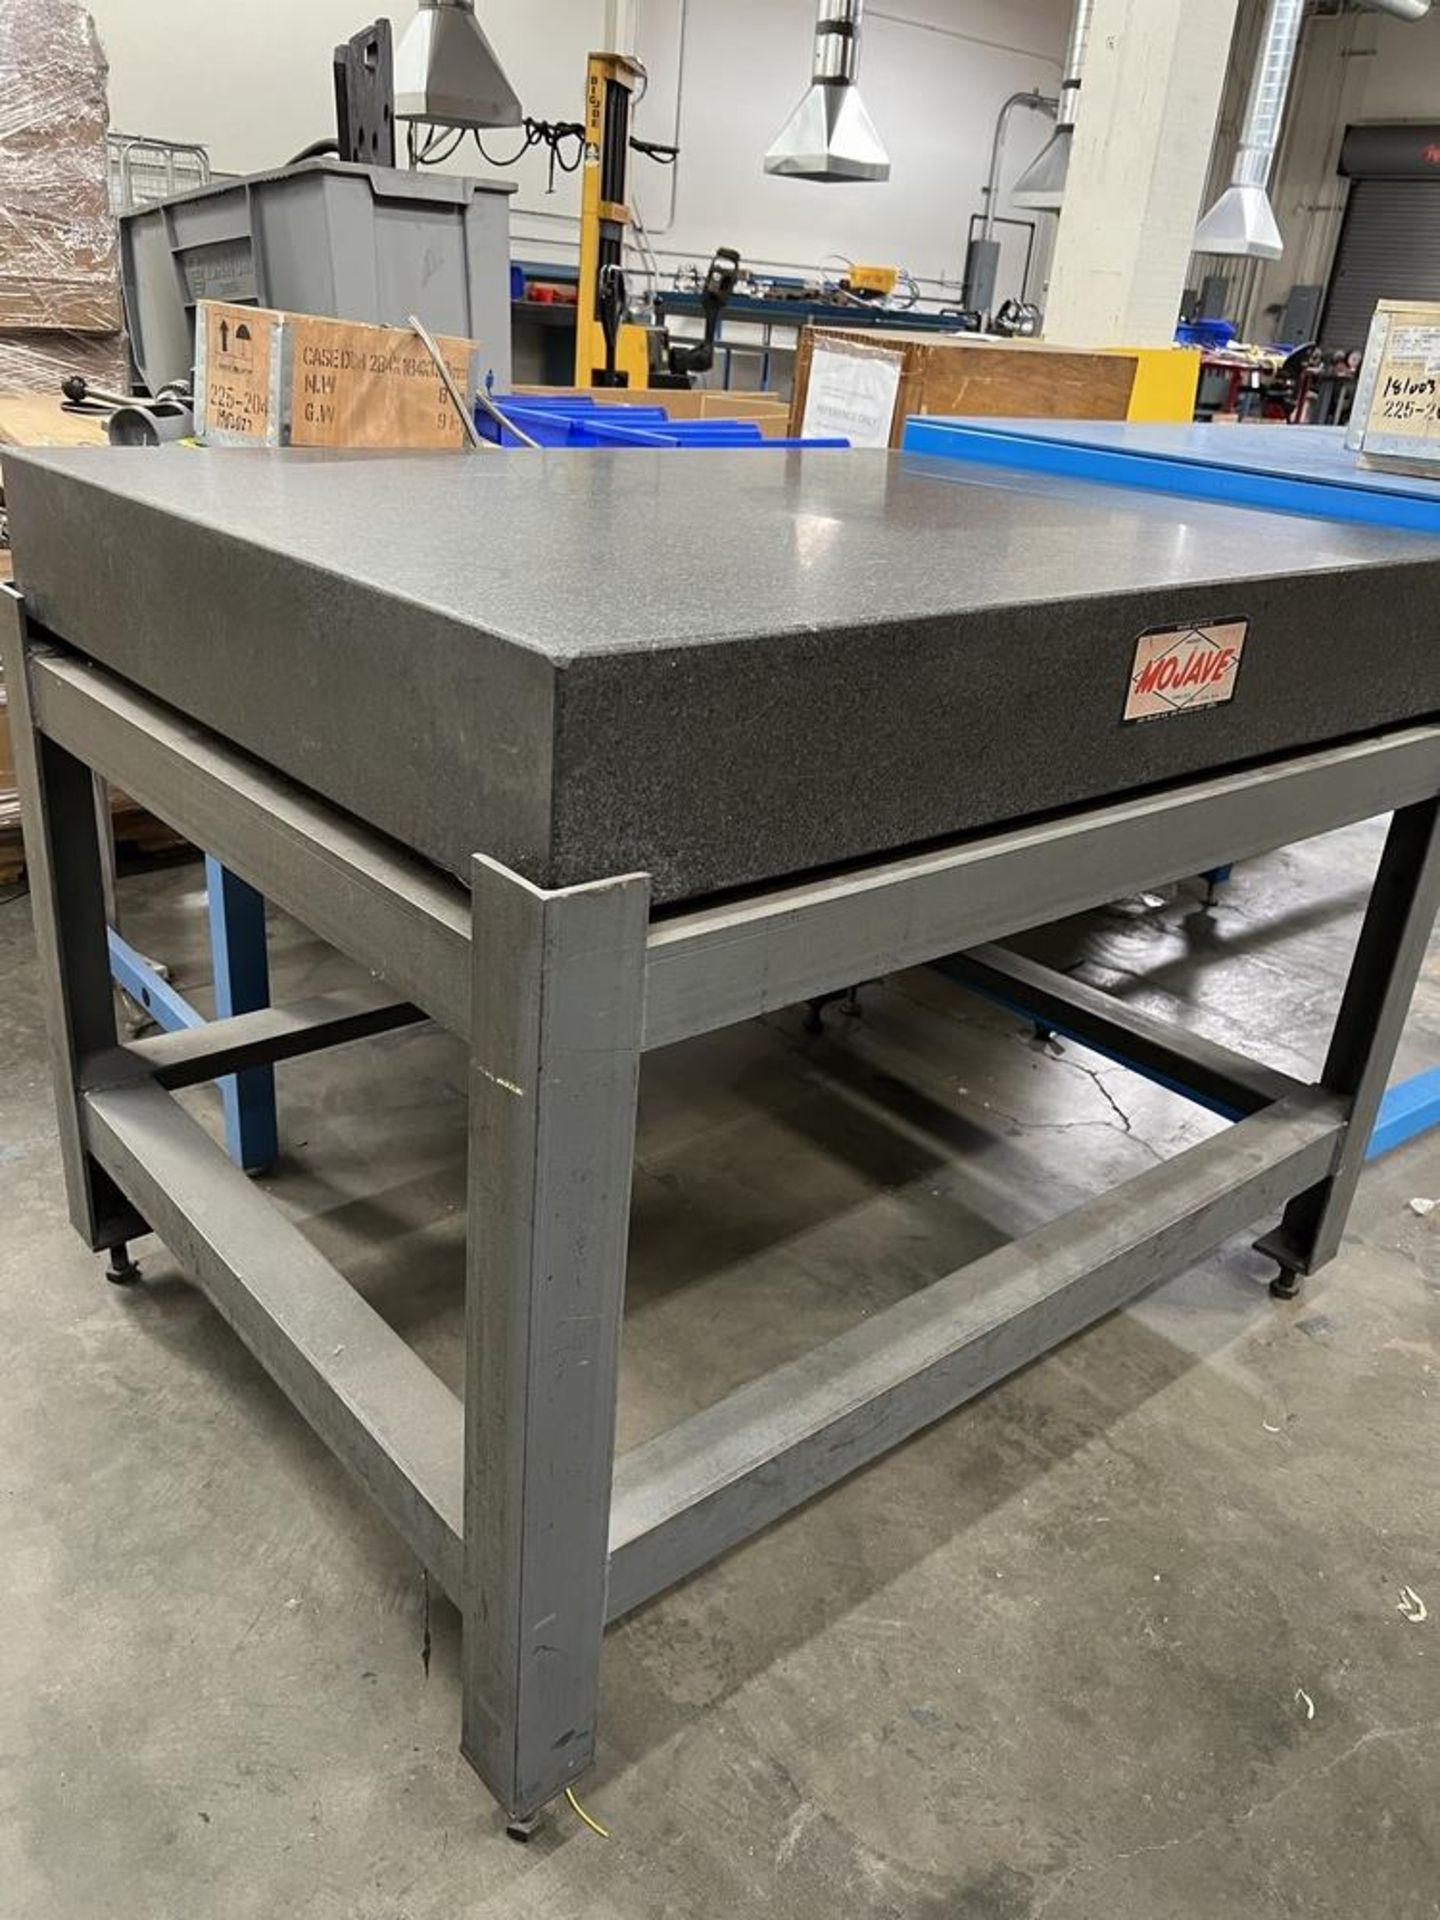 Mojave Black Granite Inspection Table on Heavy Duty Stand 48" x 36" x 6" - Image 3 of 5